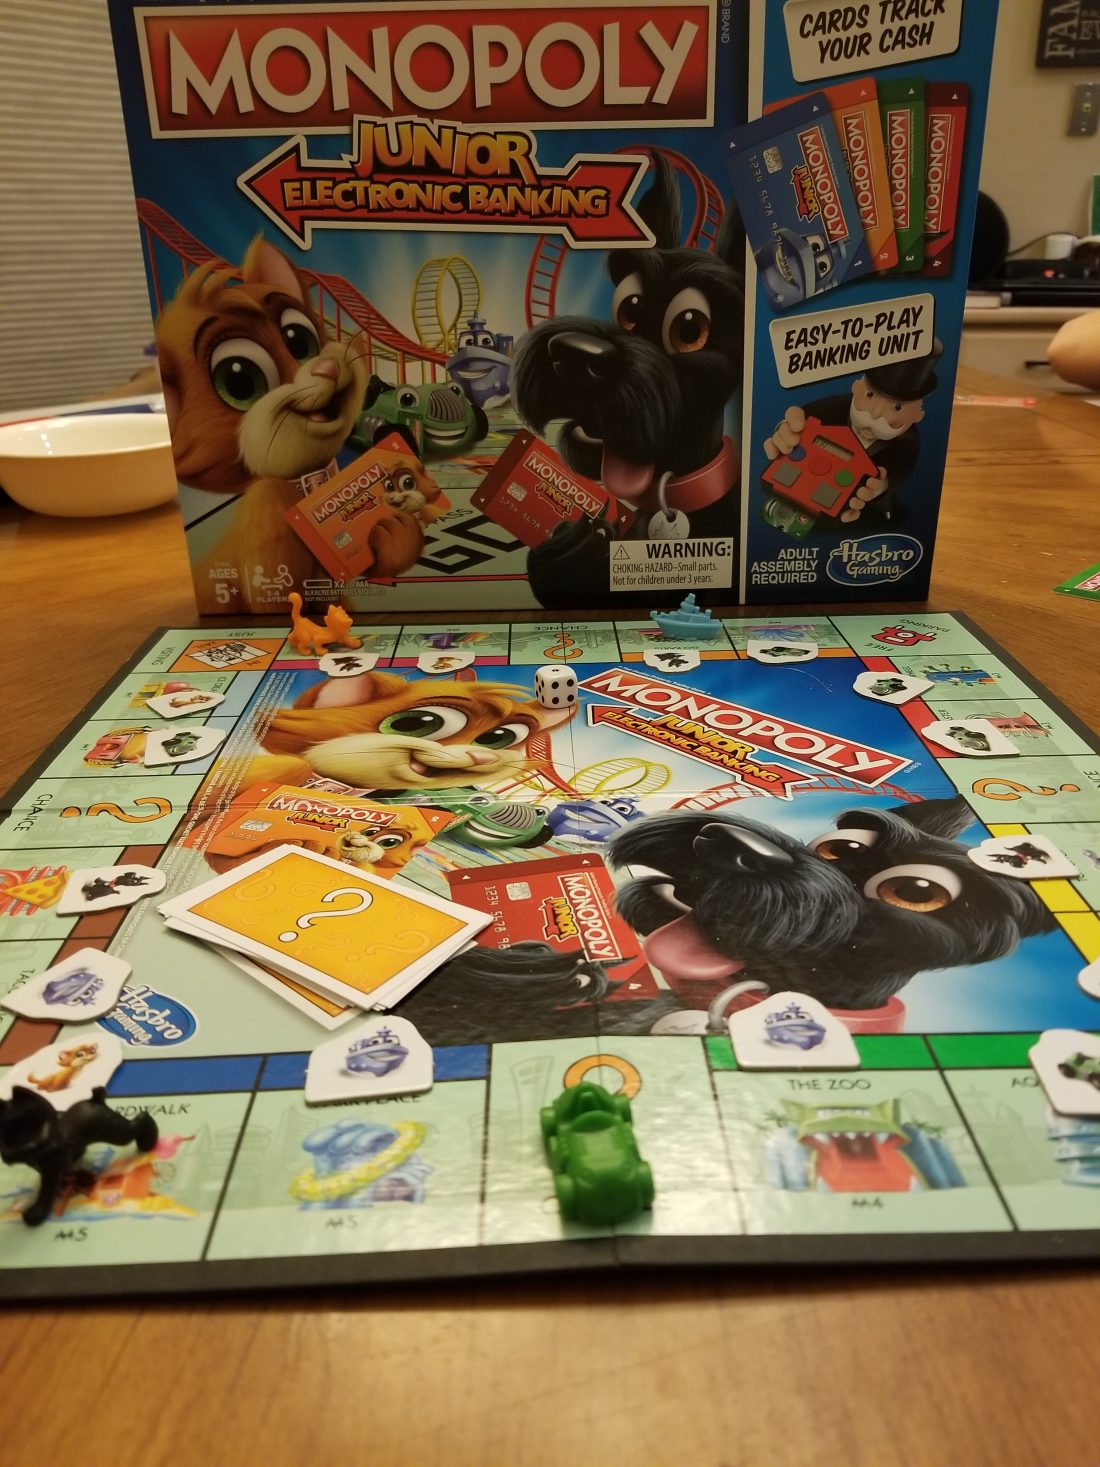 Monopoly Here Now World Edition Electronic Banking Board Game